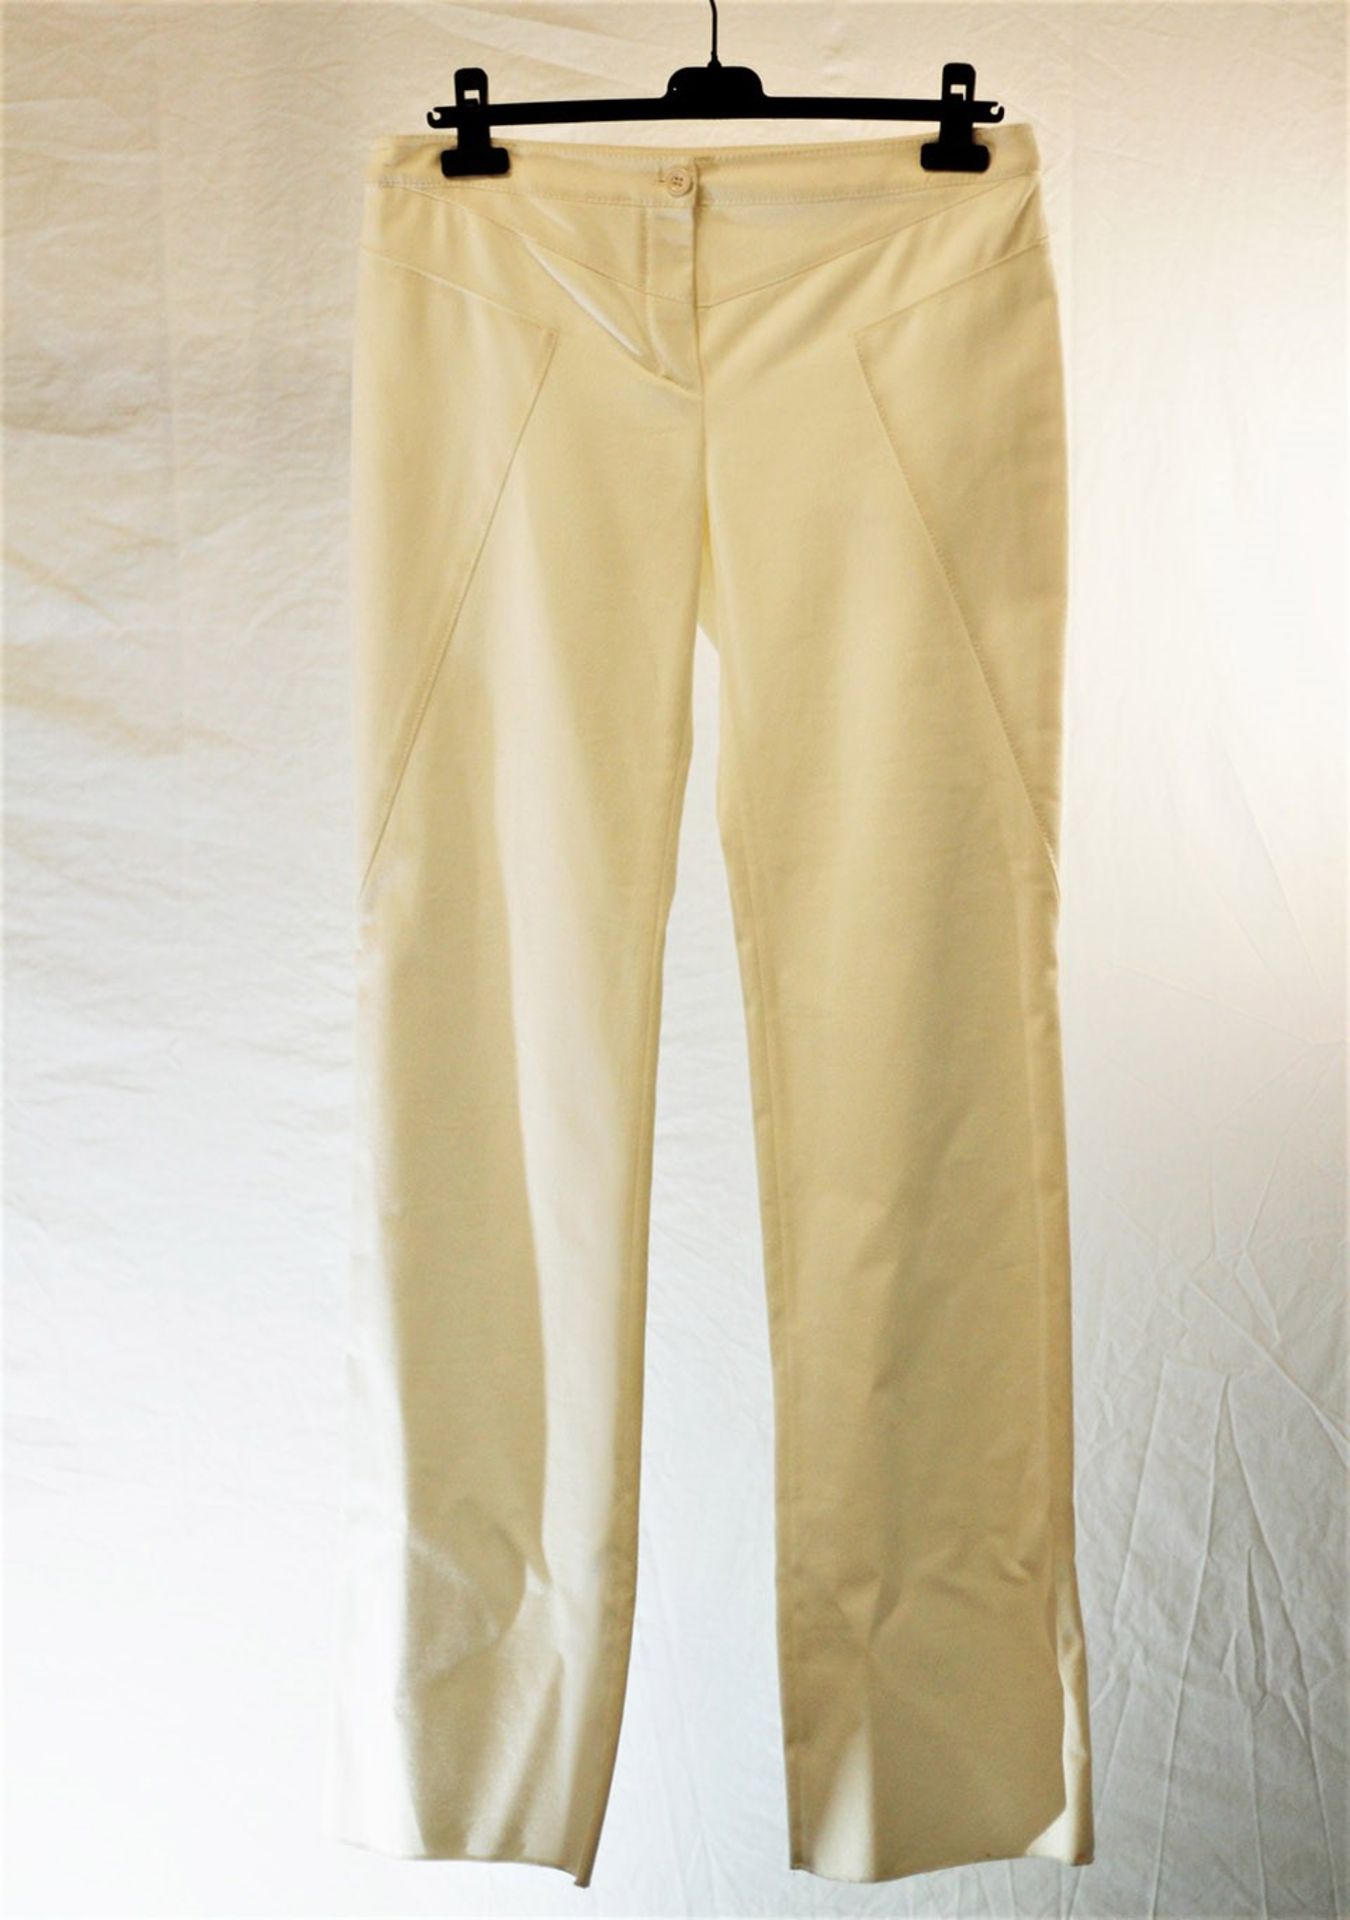 1 x Valentino Cream Trousers - Size: 10 - Material: 98% Cotton, 2% Elastane. Lining 100% Polyester -